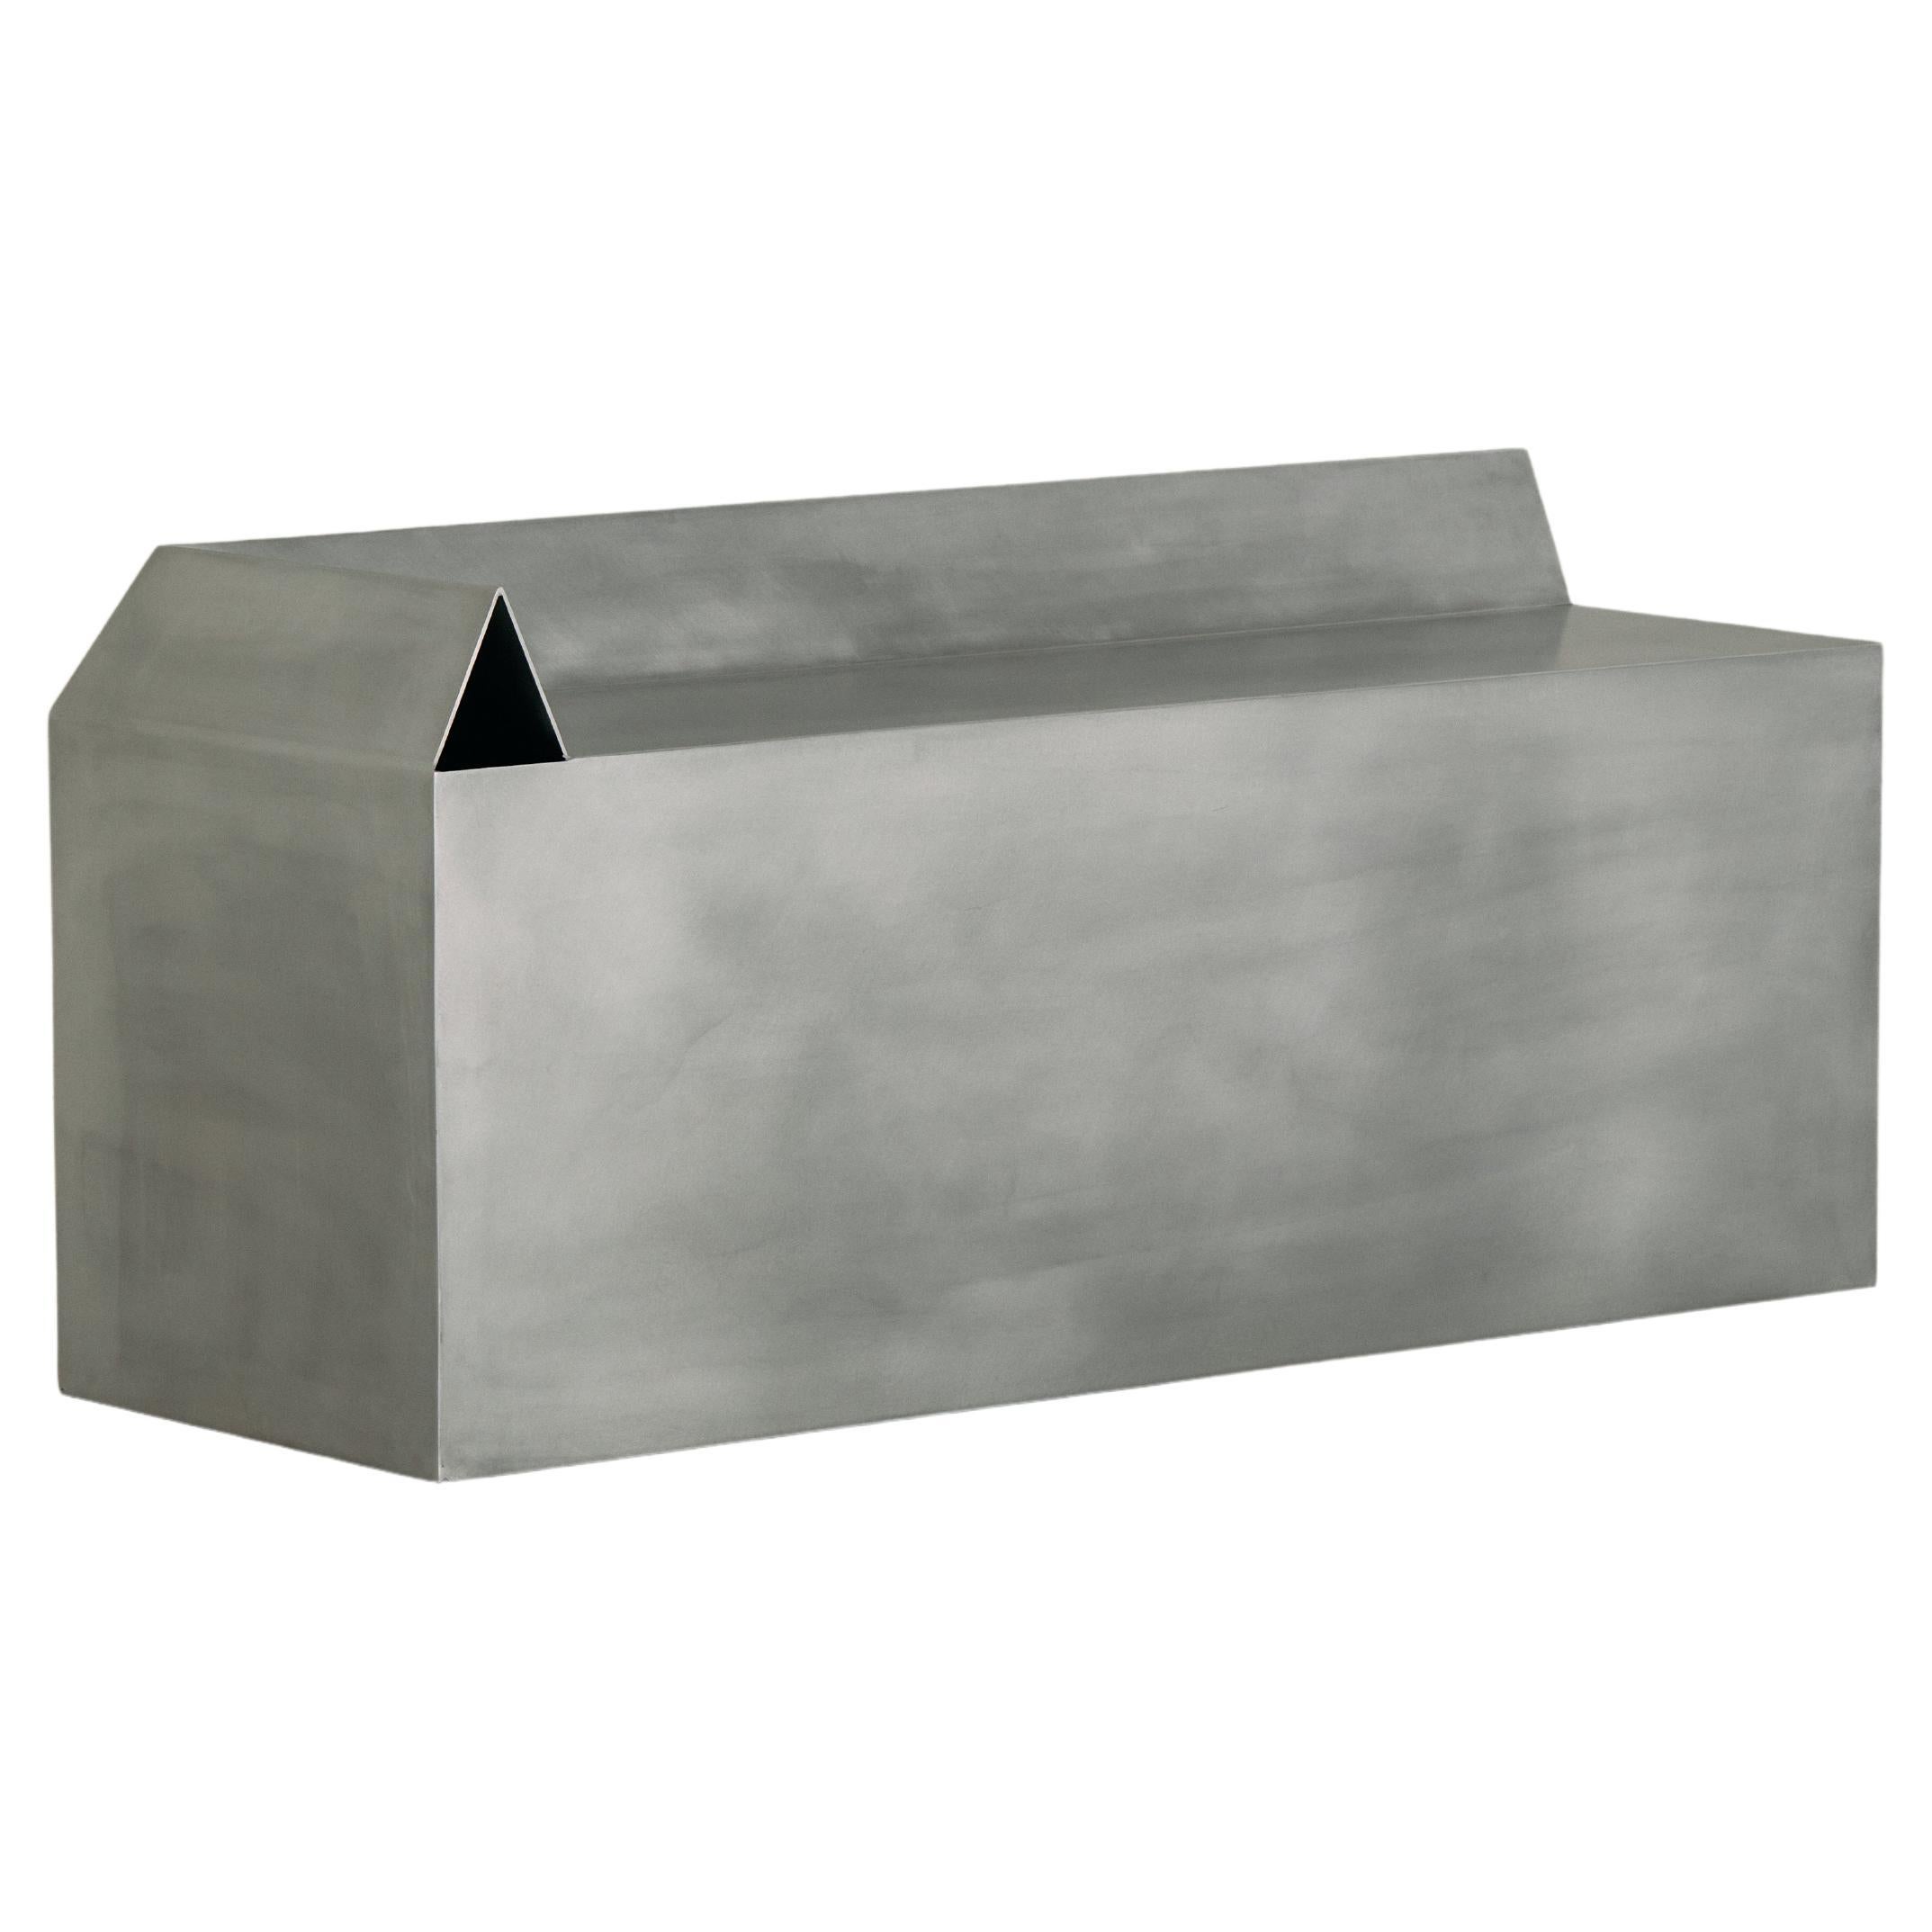 Contemporary Corner Bench in Raw Waxed Steel